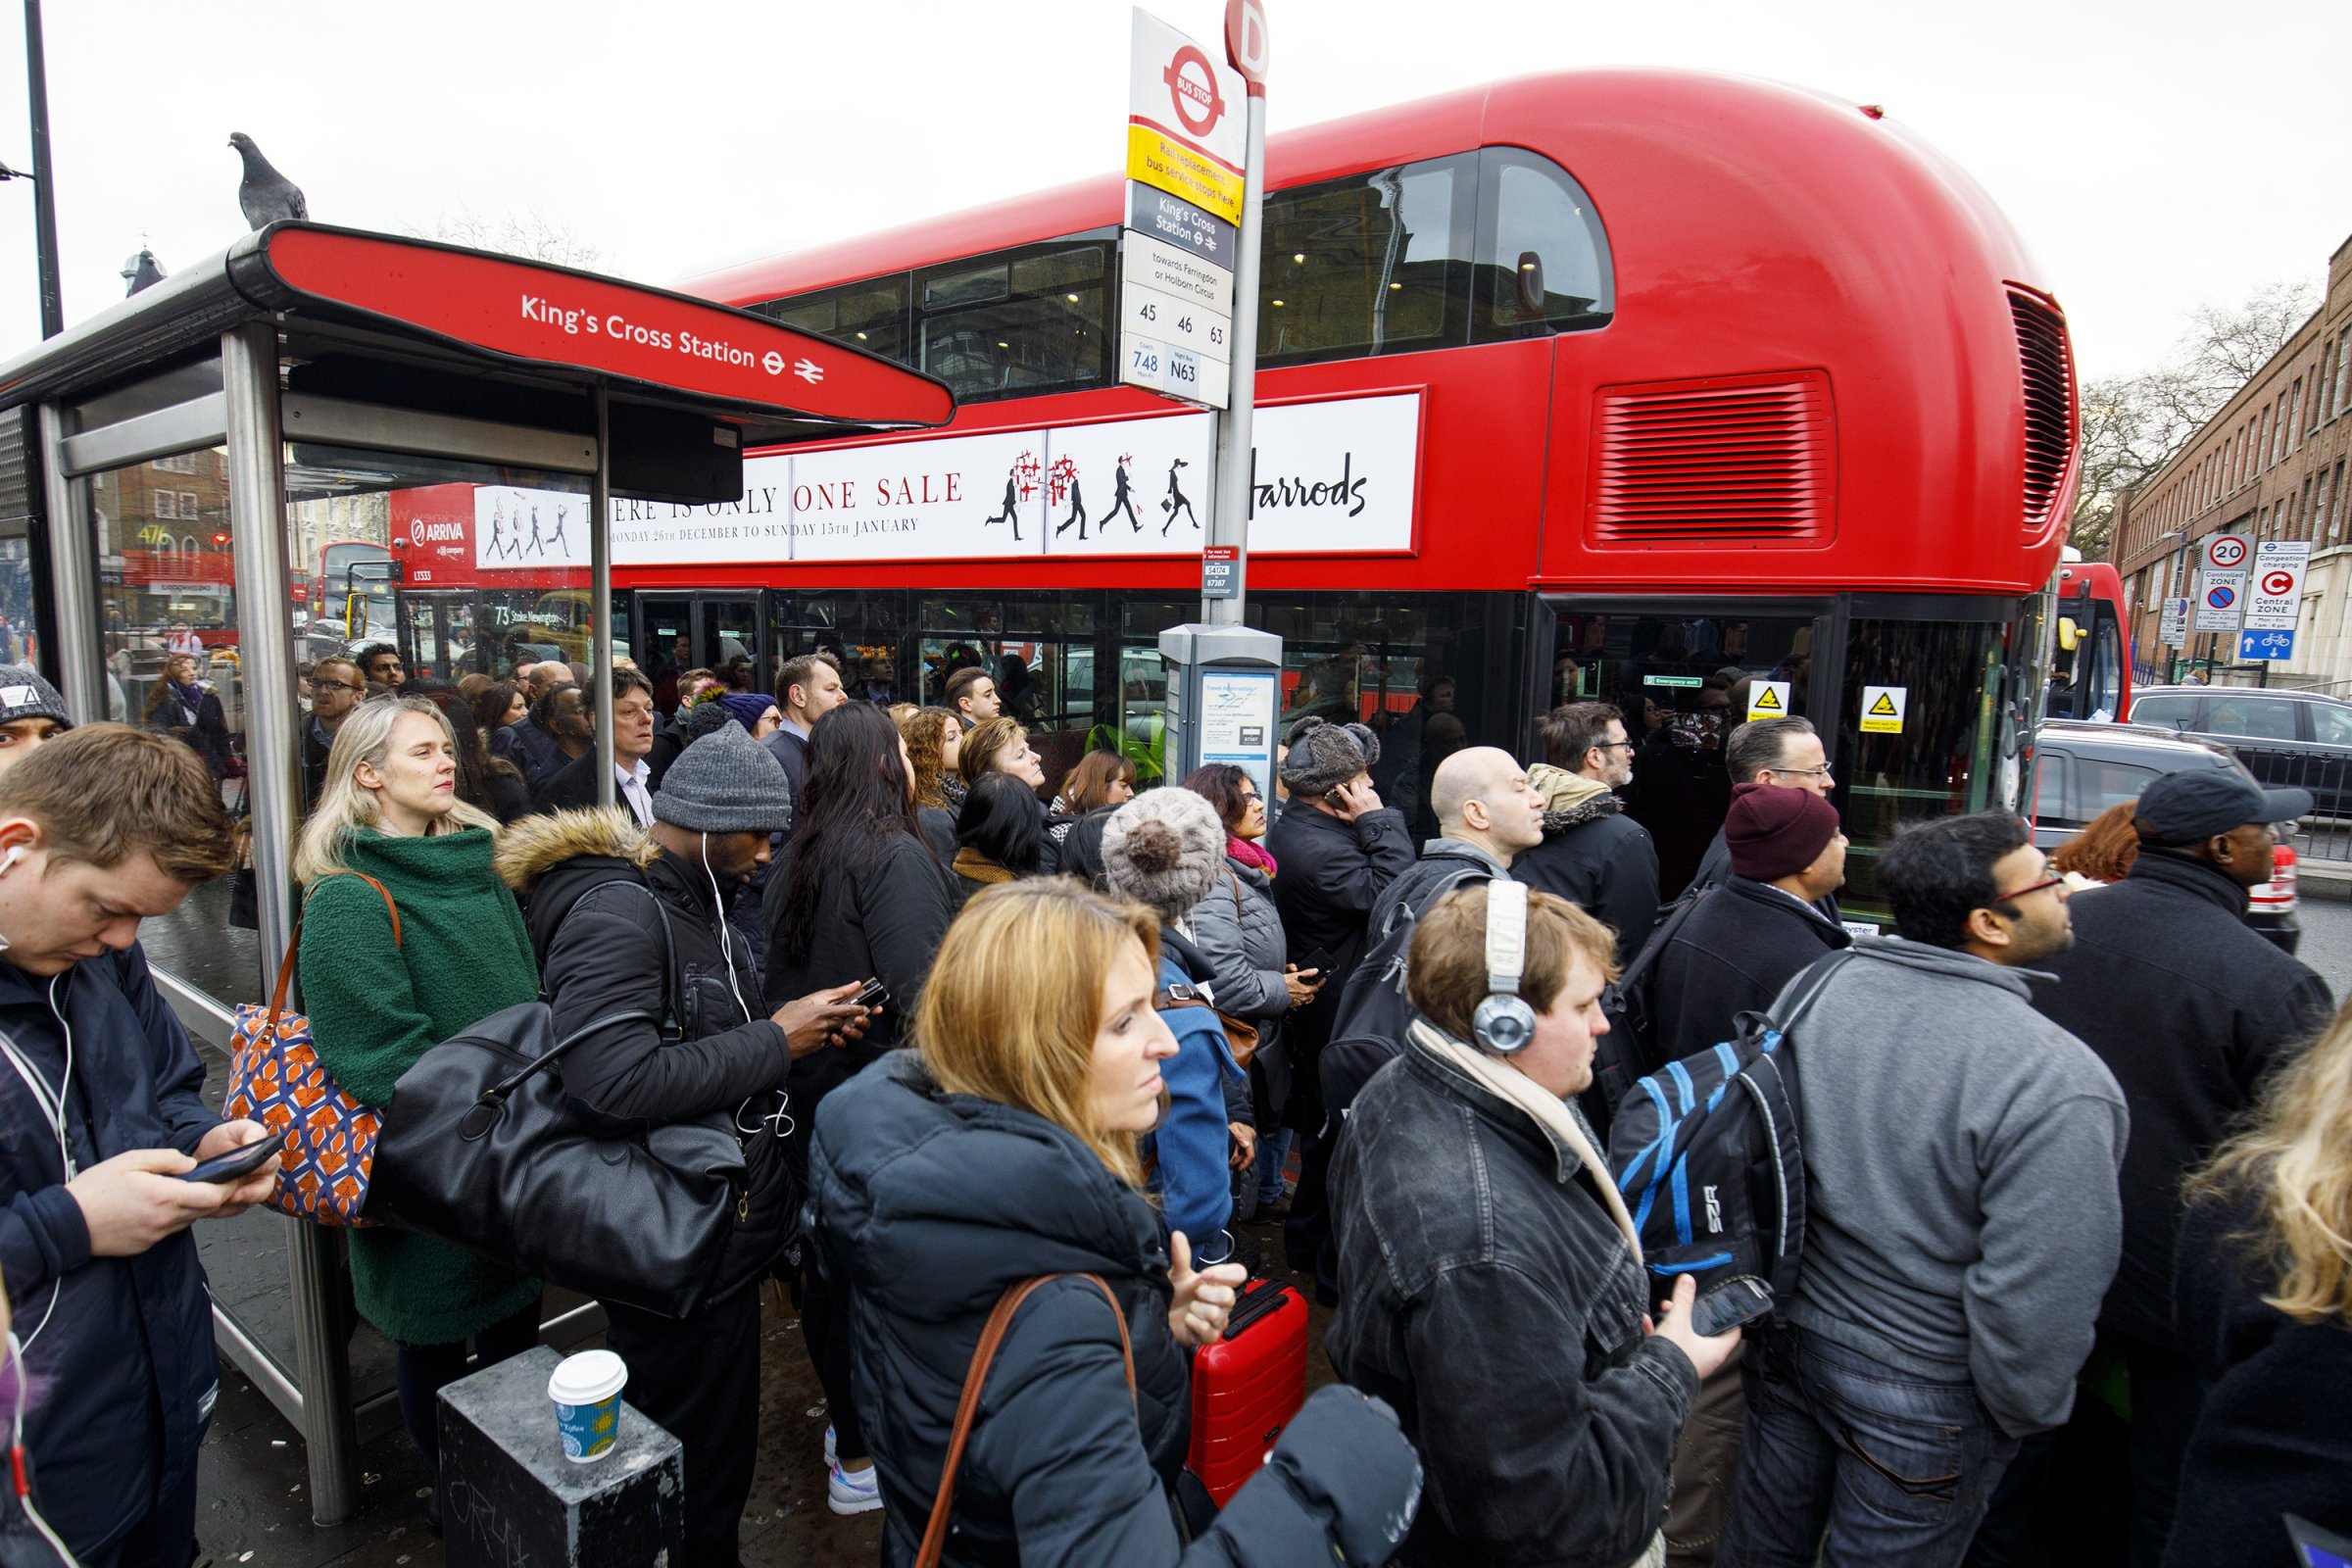 Commuters queue for buses outside King's Cross station as London Underground services are severely disrupted due to members of RMT and TSSA unions start a 24-hour strike action in a dispute over jobs cuts and closed ticket offices on January 9, 2017.